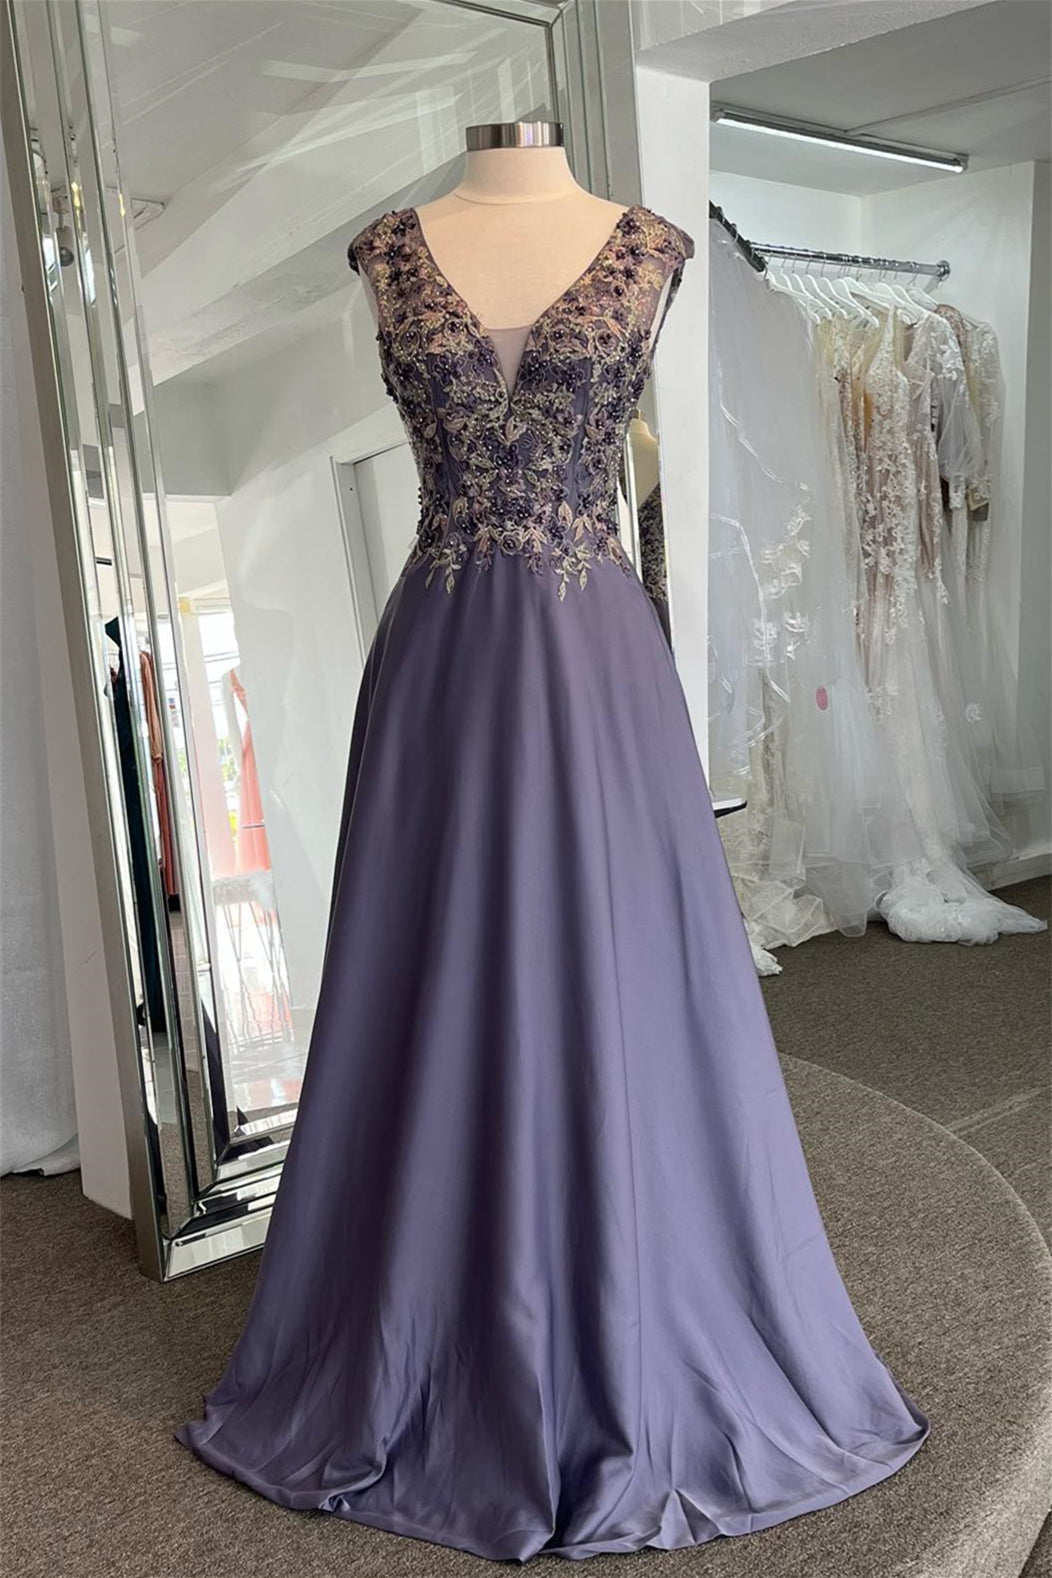 Party Dress Shop Near Me, Lavender Plunging V Neck Sleeveless Beaded Appliques Long Formal Dress